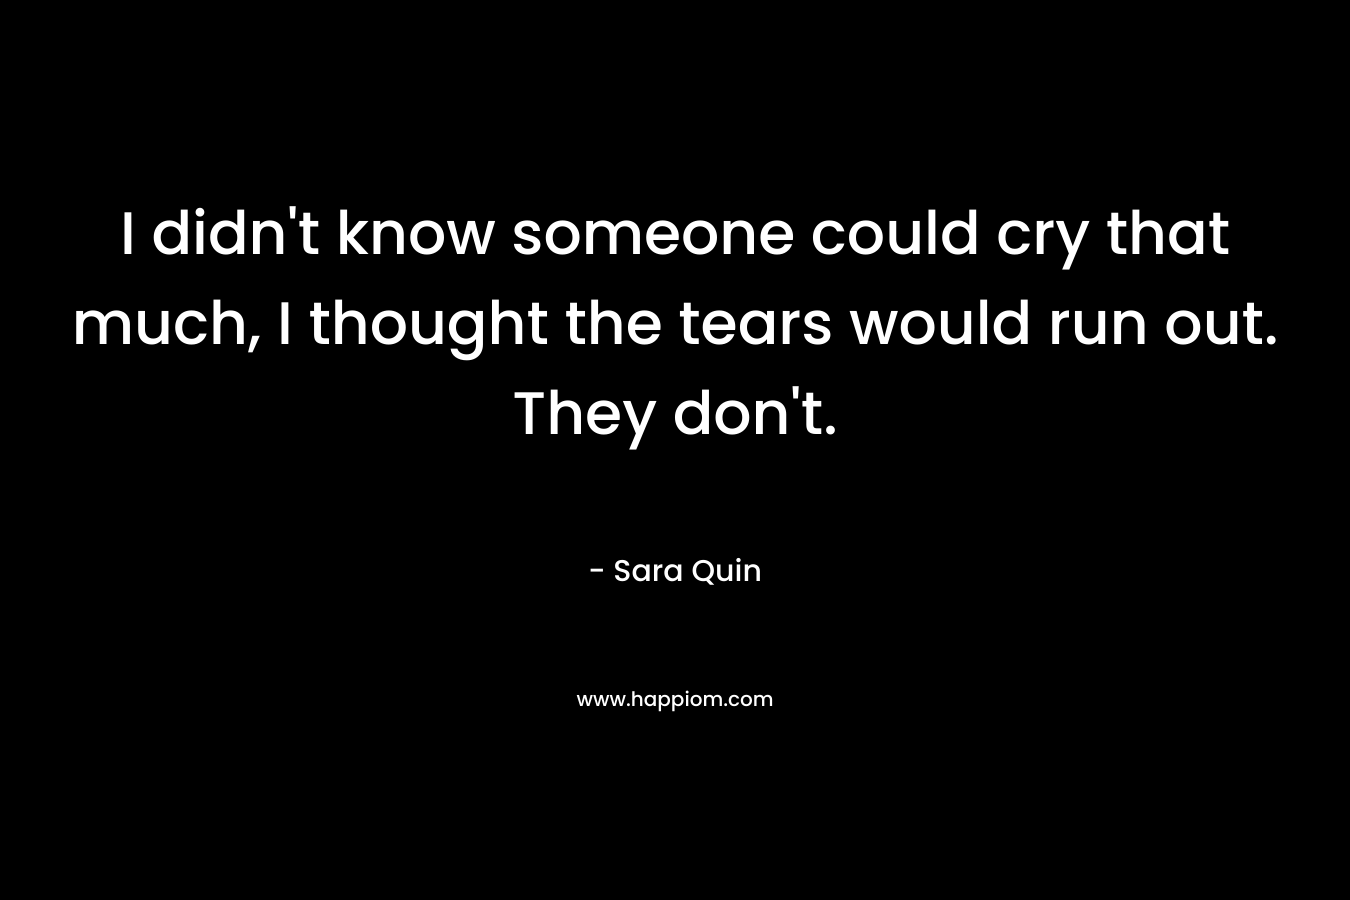 I didn't know someone could cry that much, I thought the tears would run out. They don't.